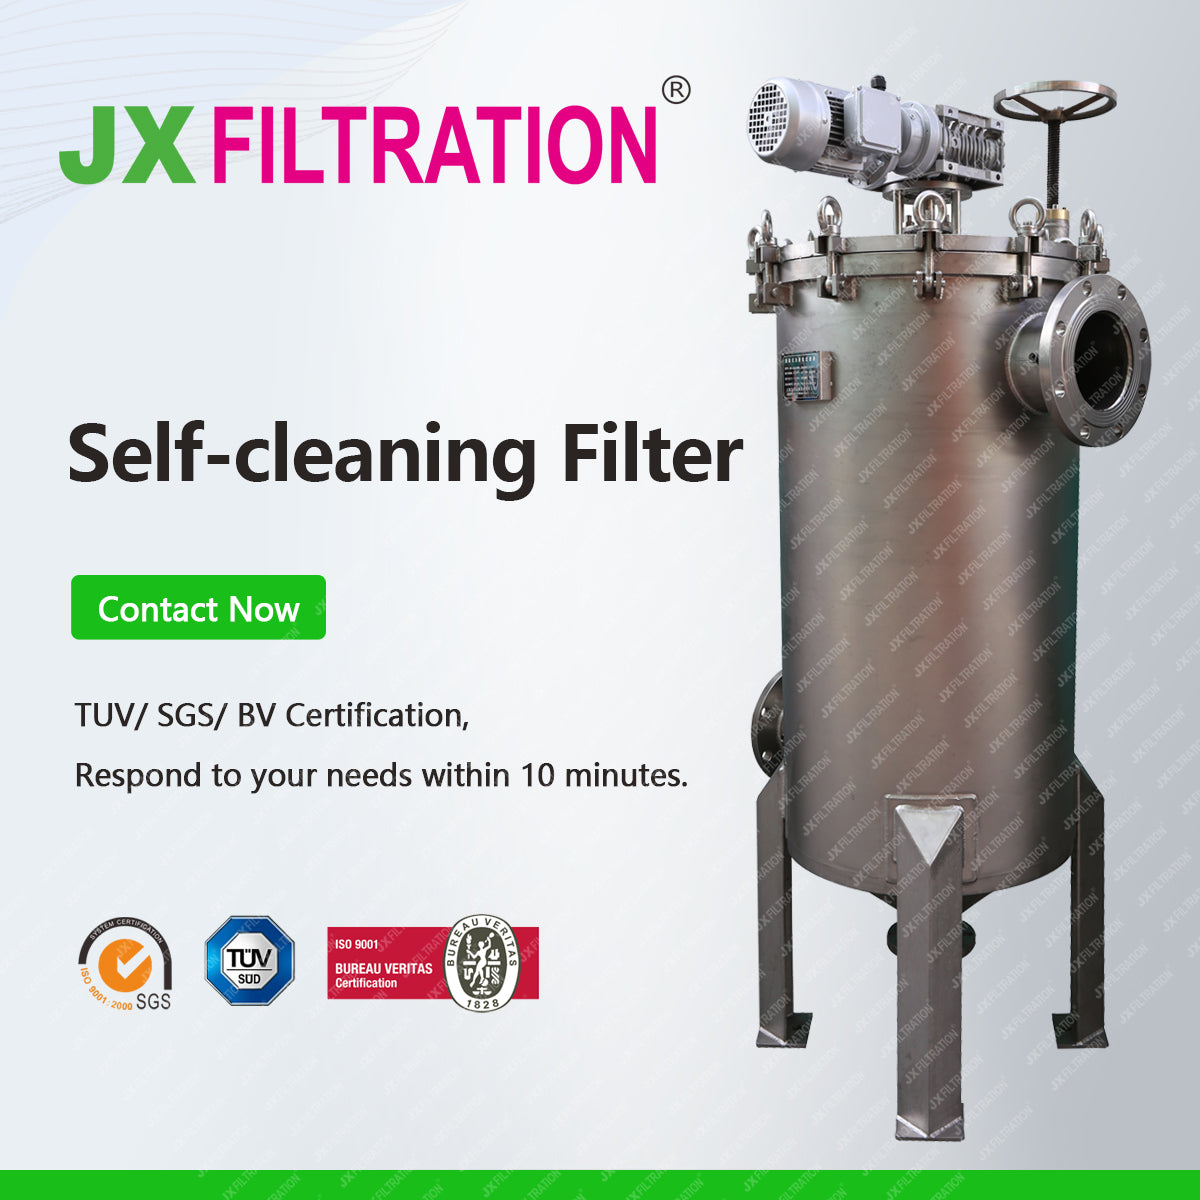 Model 1020 Automatic Self-cleaning filter